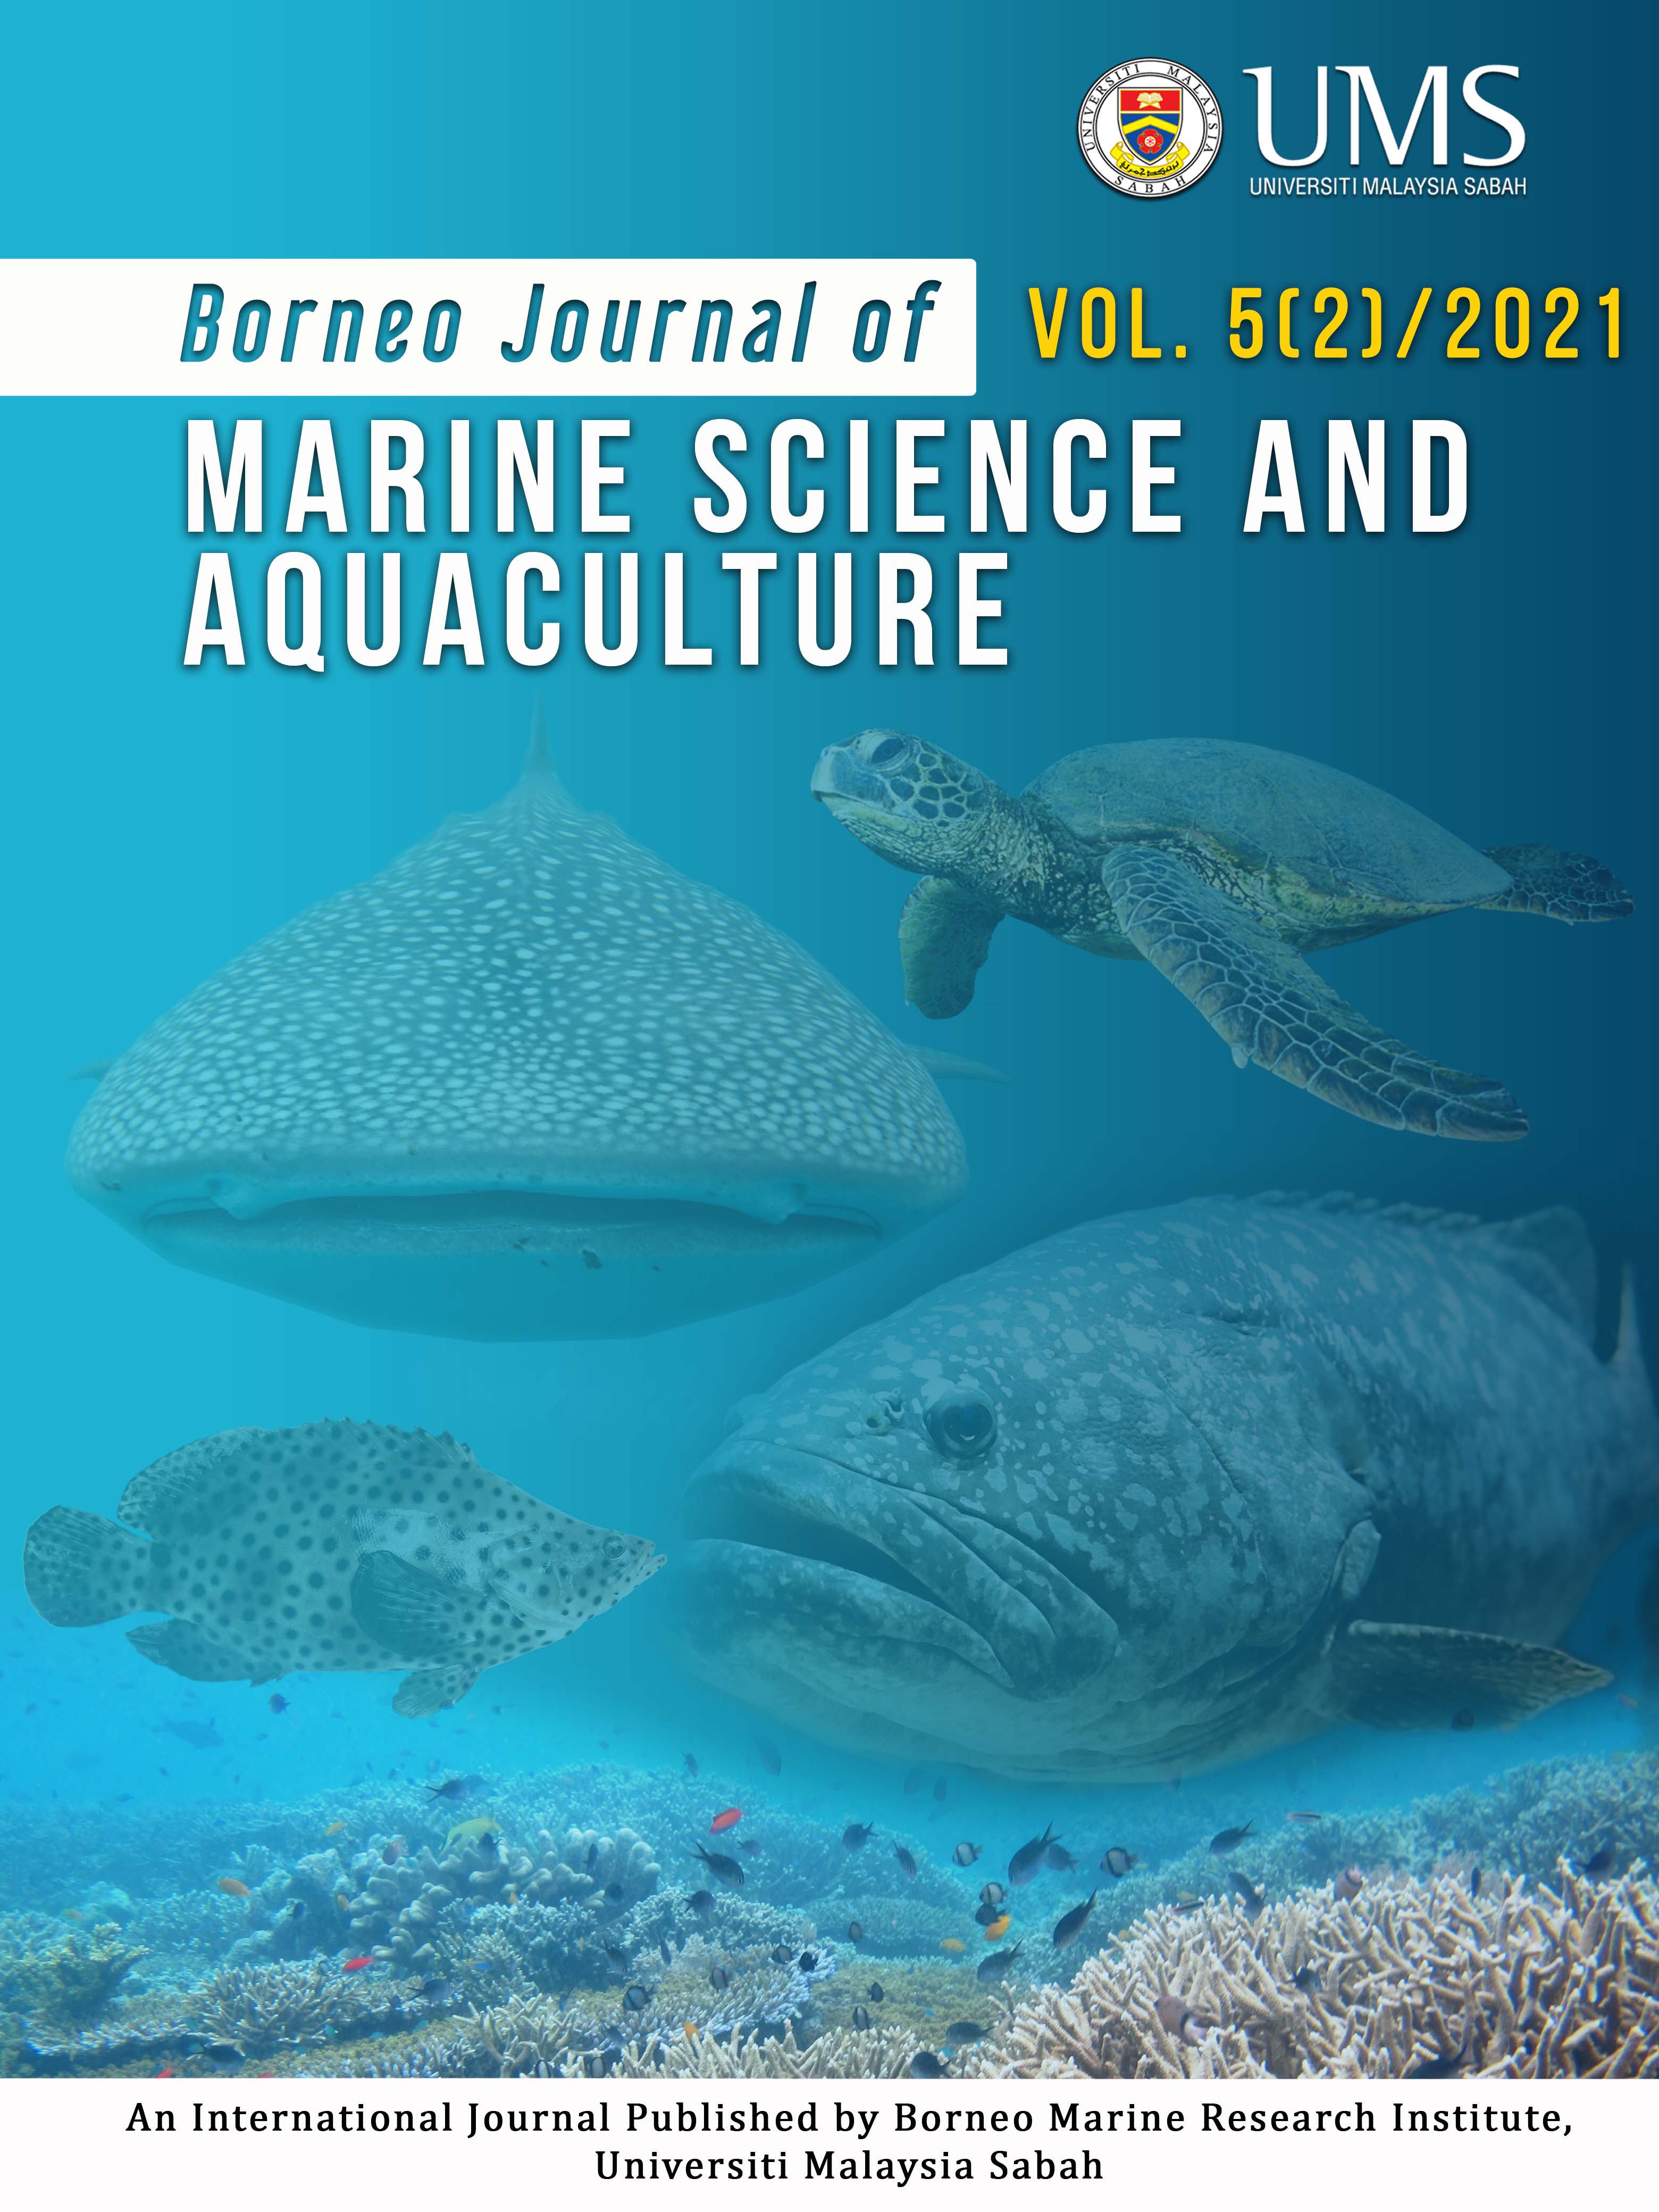 					View Vol. 5 No. 2 (2021): Borneo Journal of Marine Science and Aquaculture
				